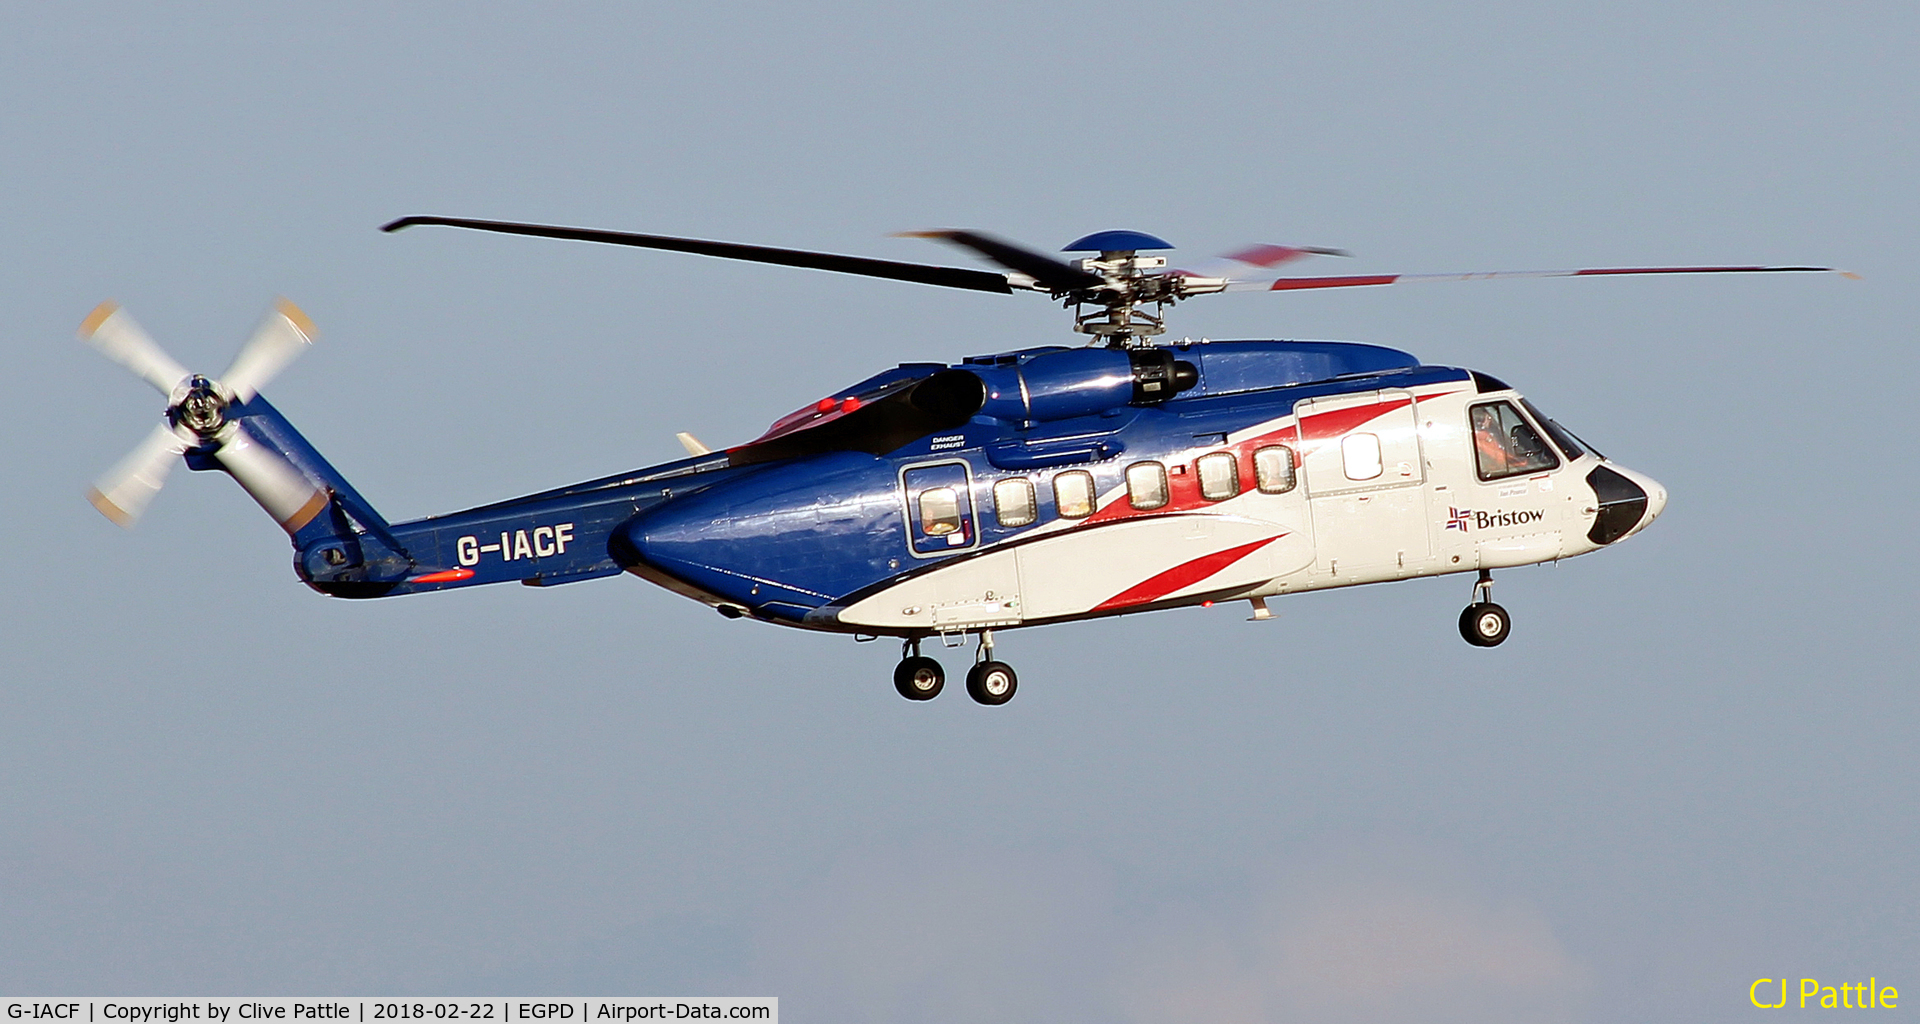 G-IACF, 2007 Sikorsky S-92A C/N 920068, In action at Aberdeen